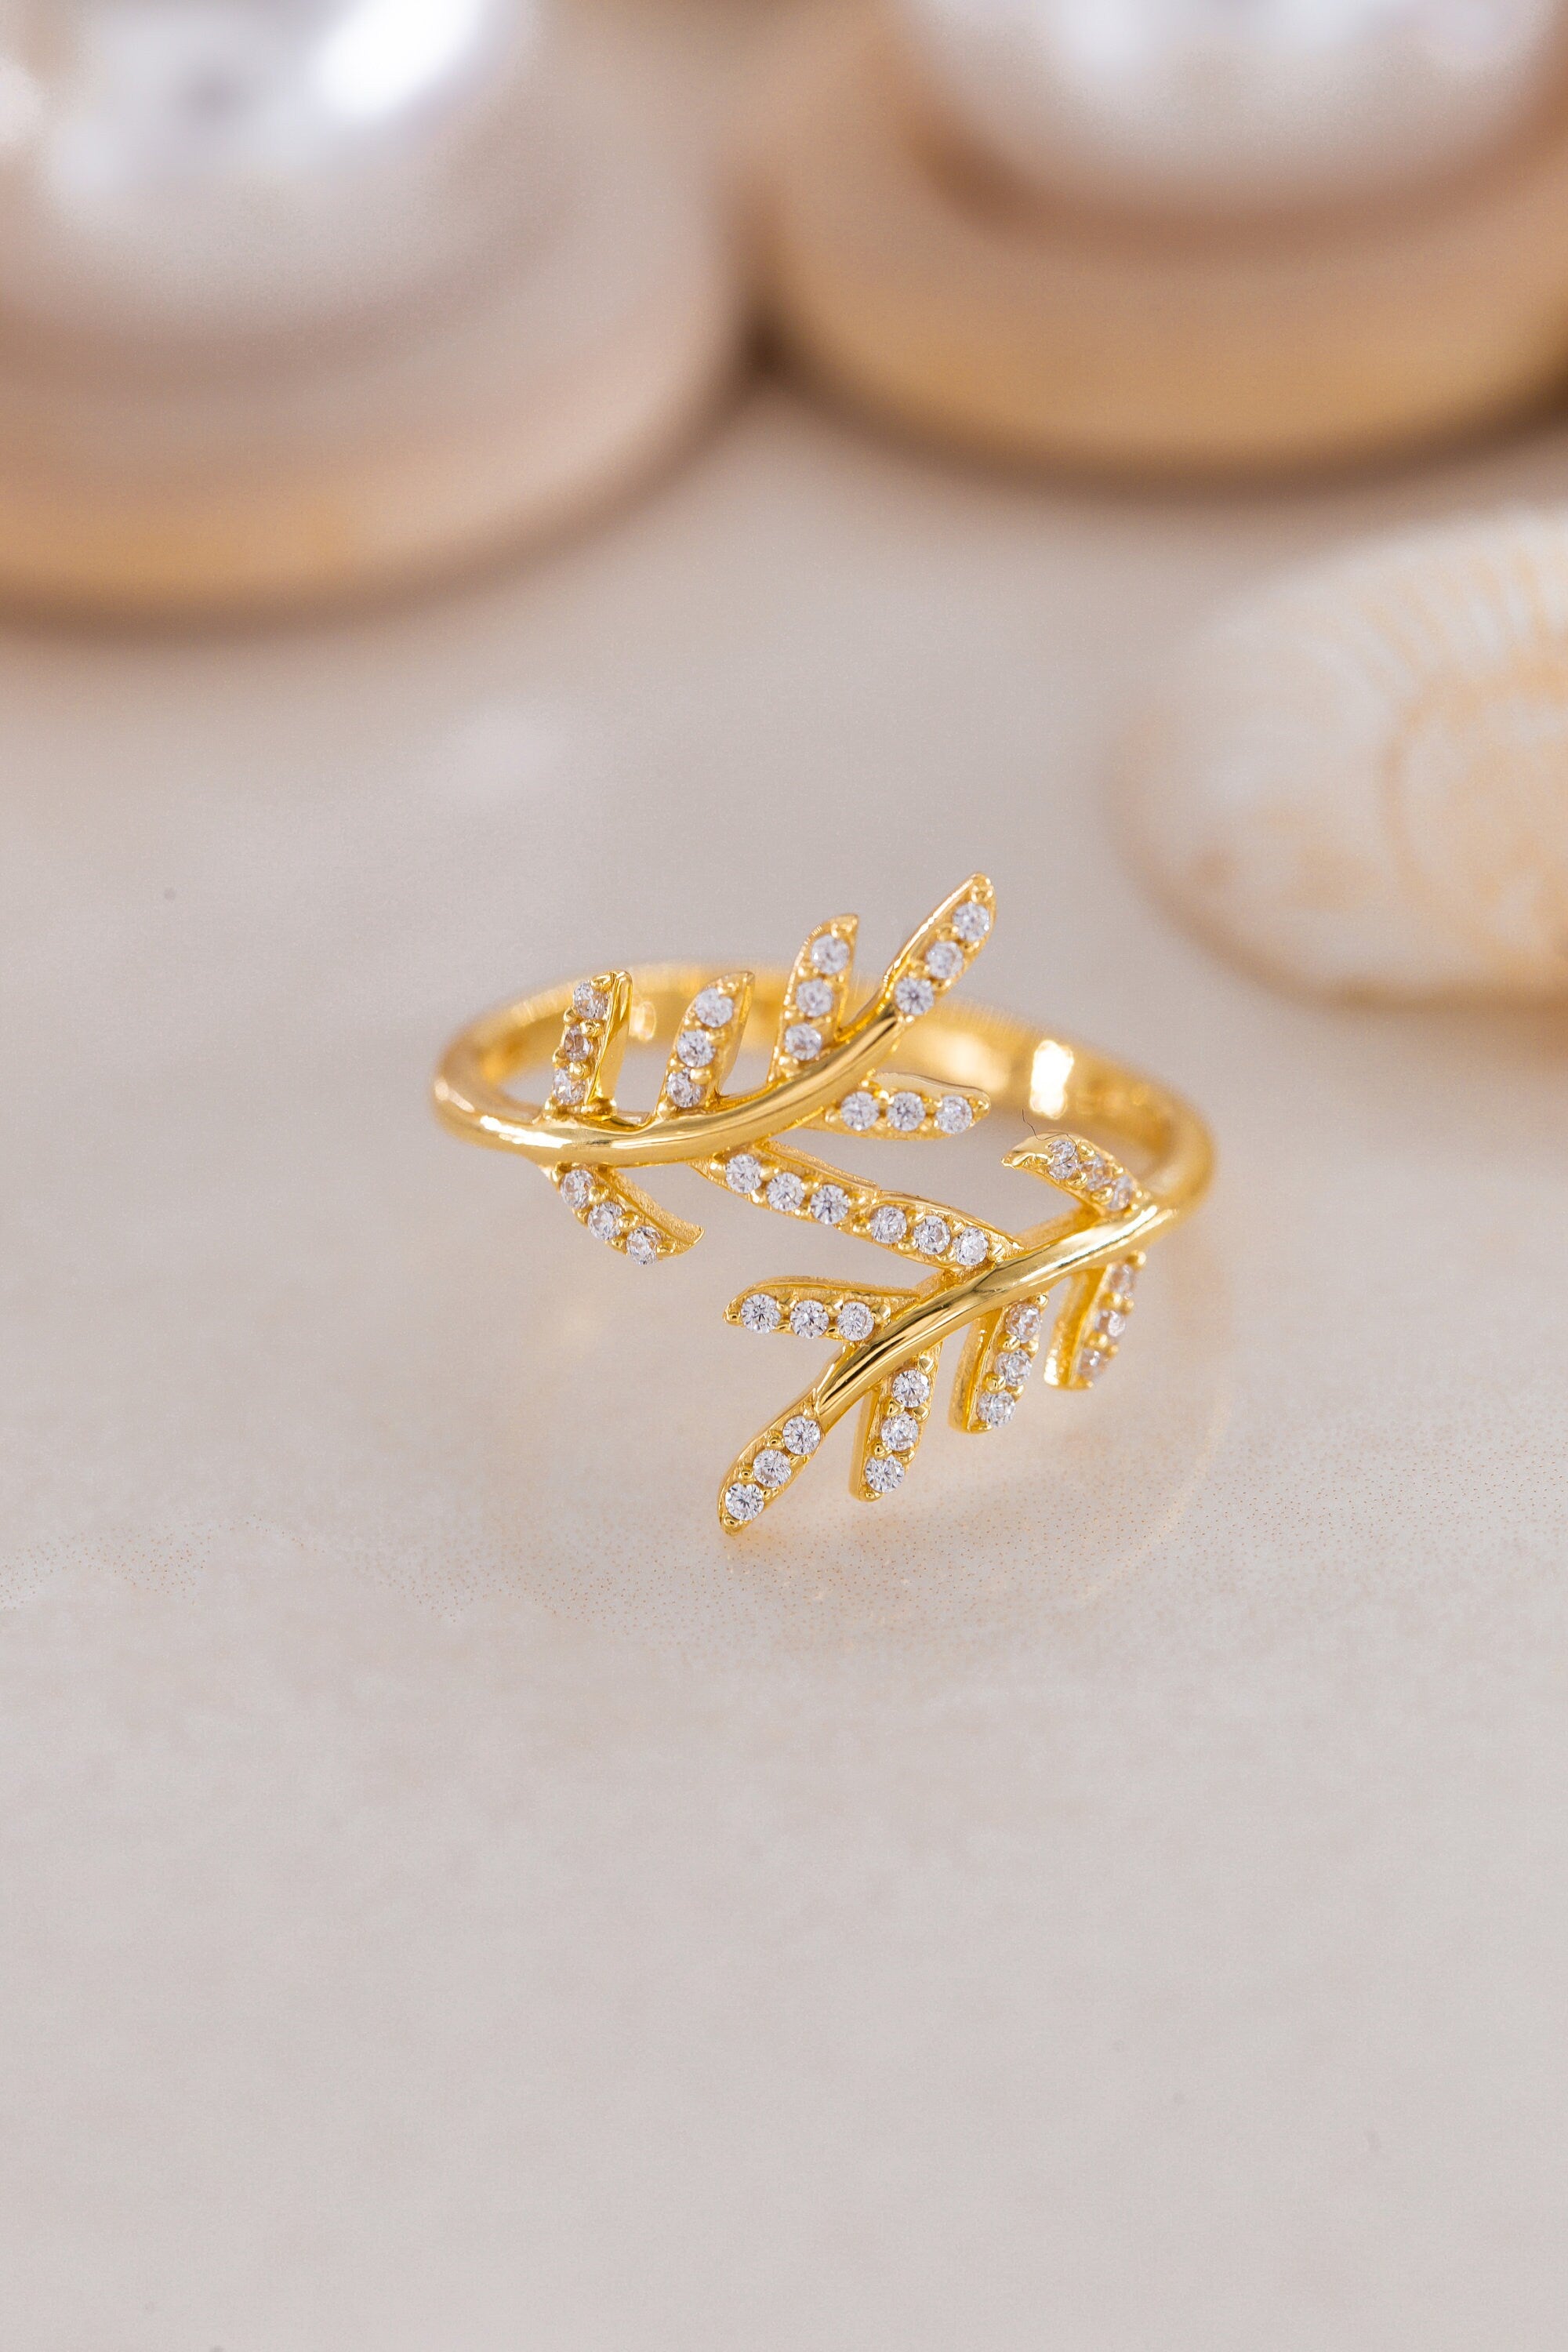 14K Branch Gold Ring - Engagement Ring - Promise Ring - Leaf Ring - Gift For Mother Day - Nature Ring - Vine Ring - Solid Gold Leaf Ring